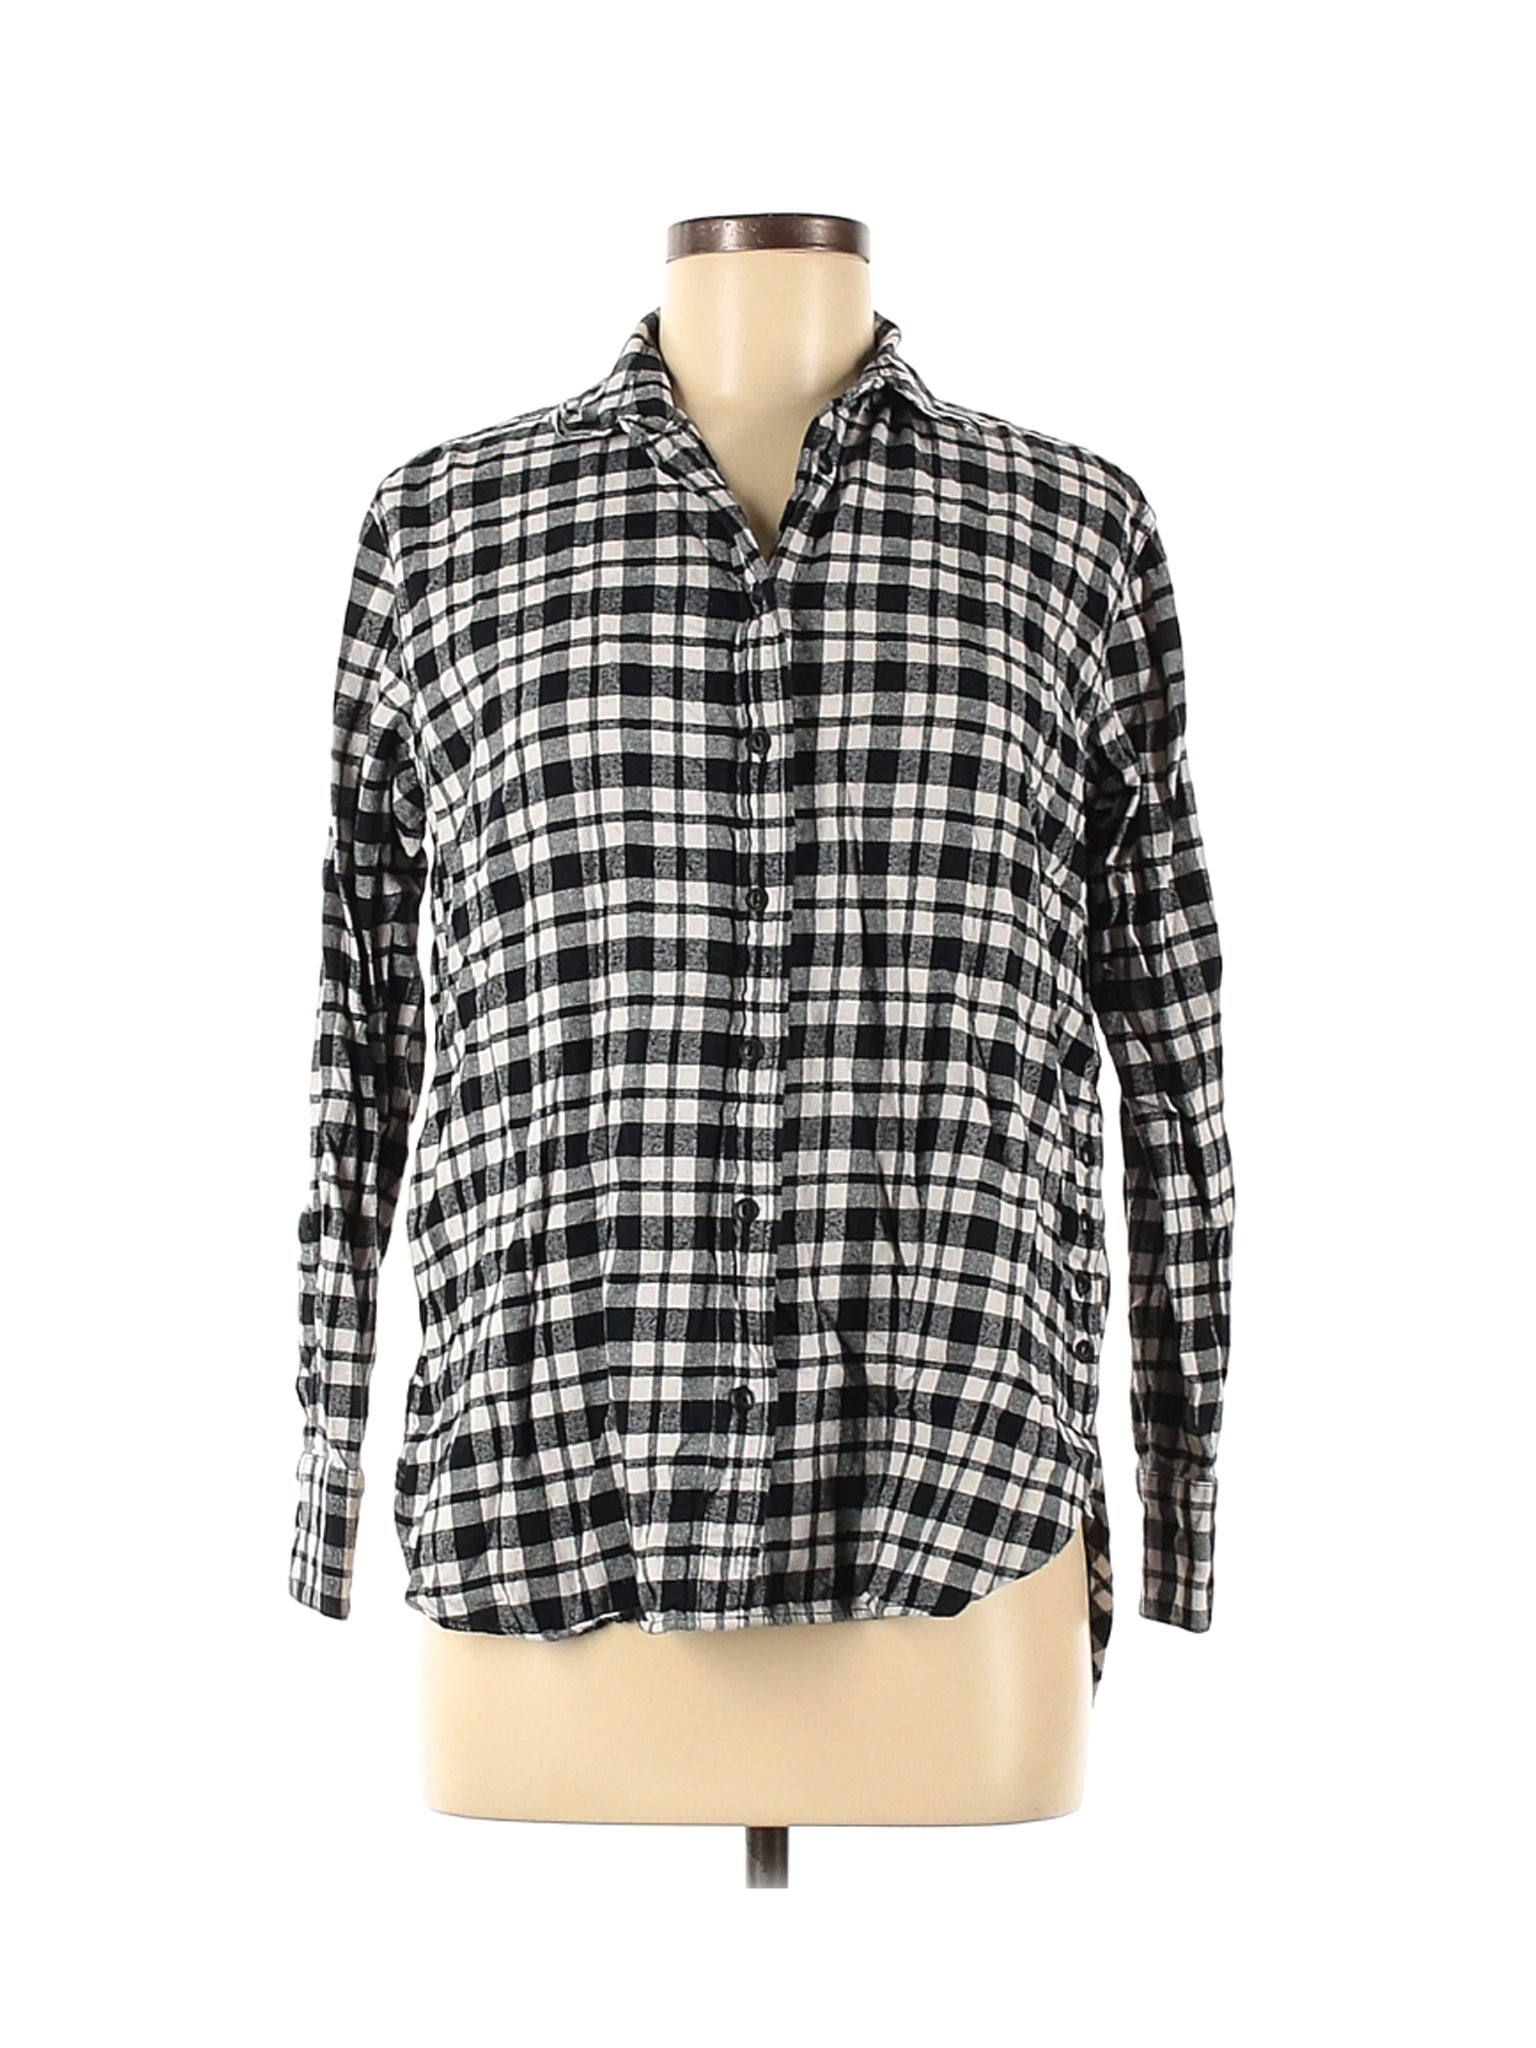 Flannel Oversized Side-Button Shirt In Bridgeport Plaid size - S